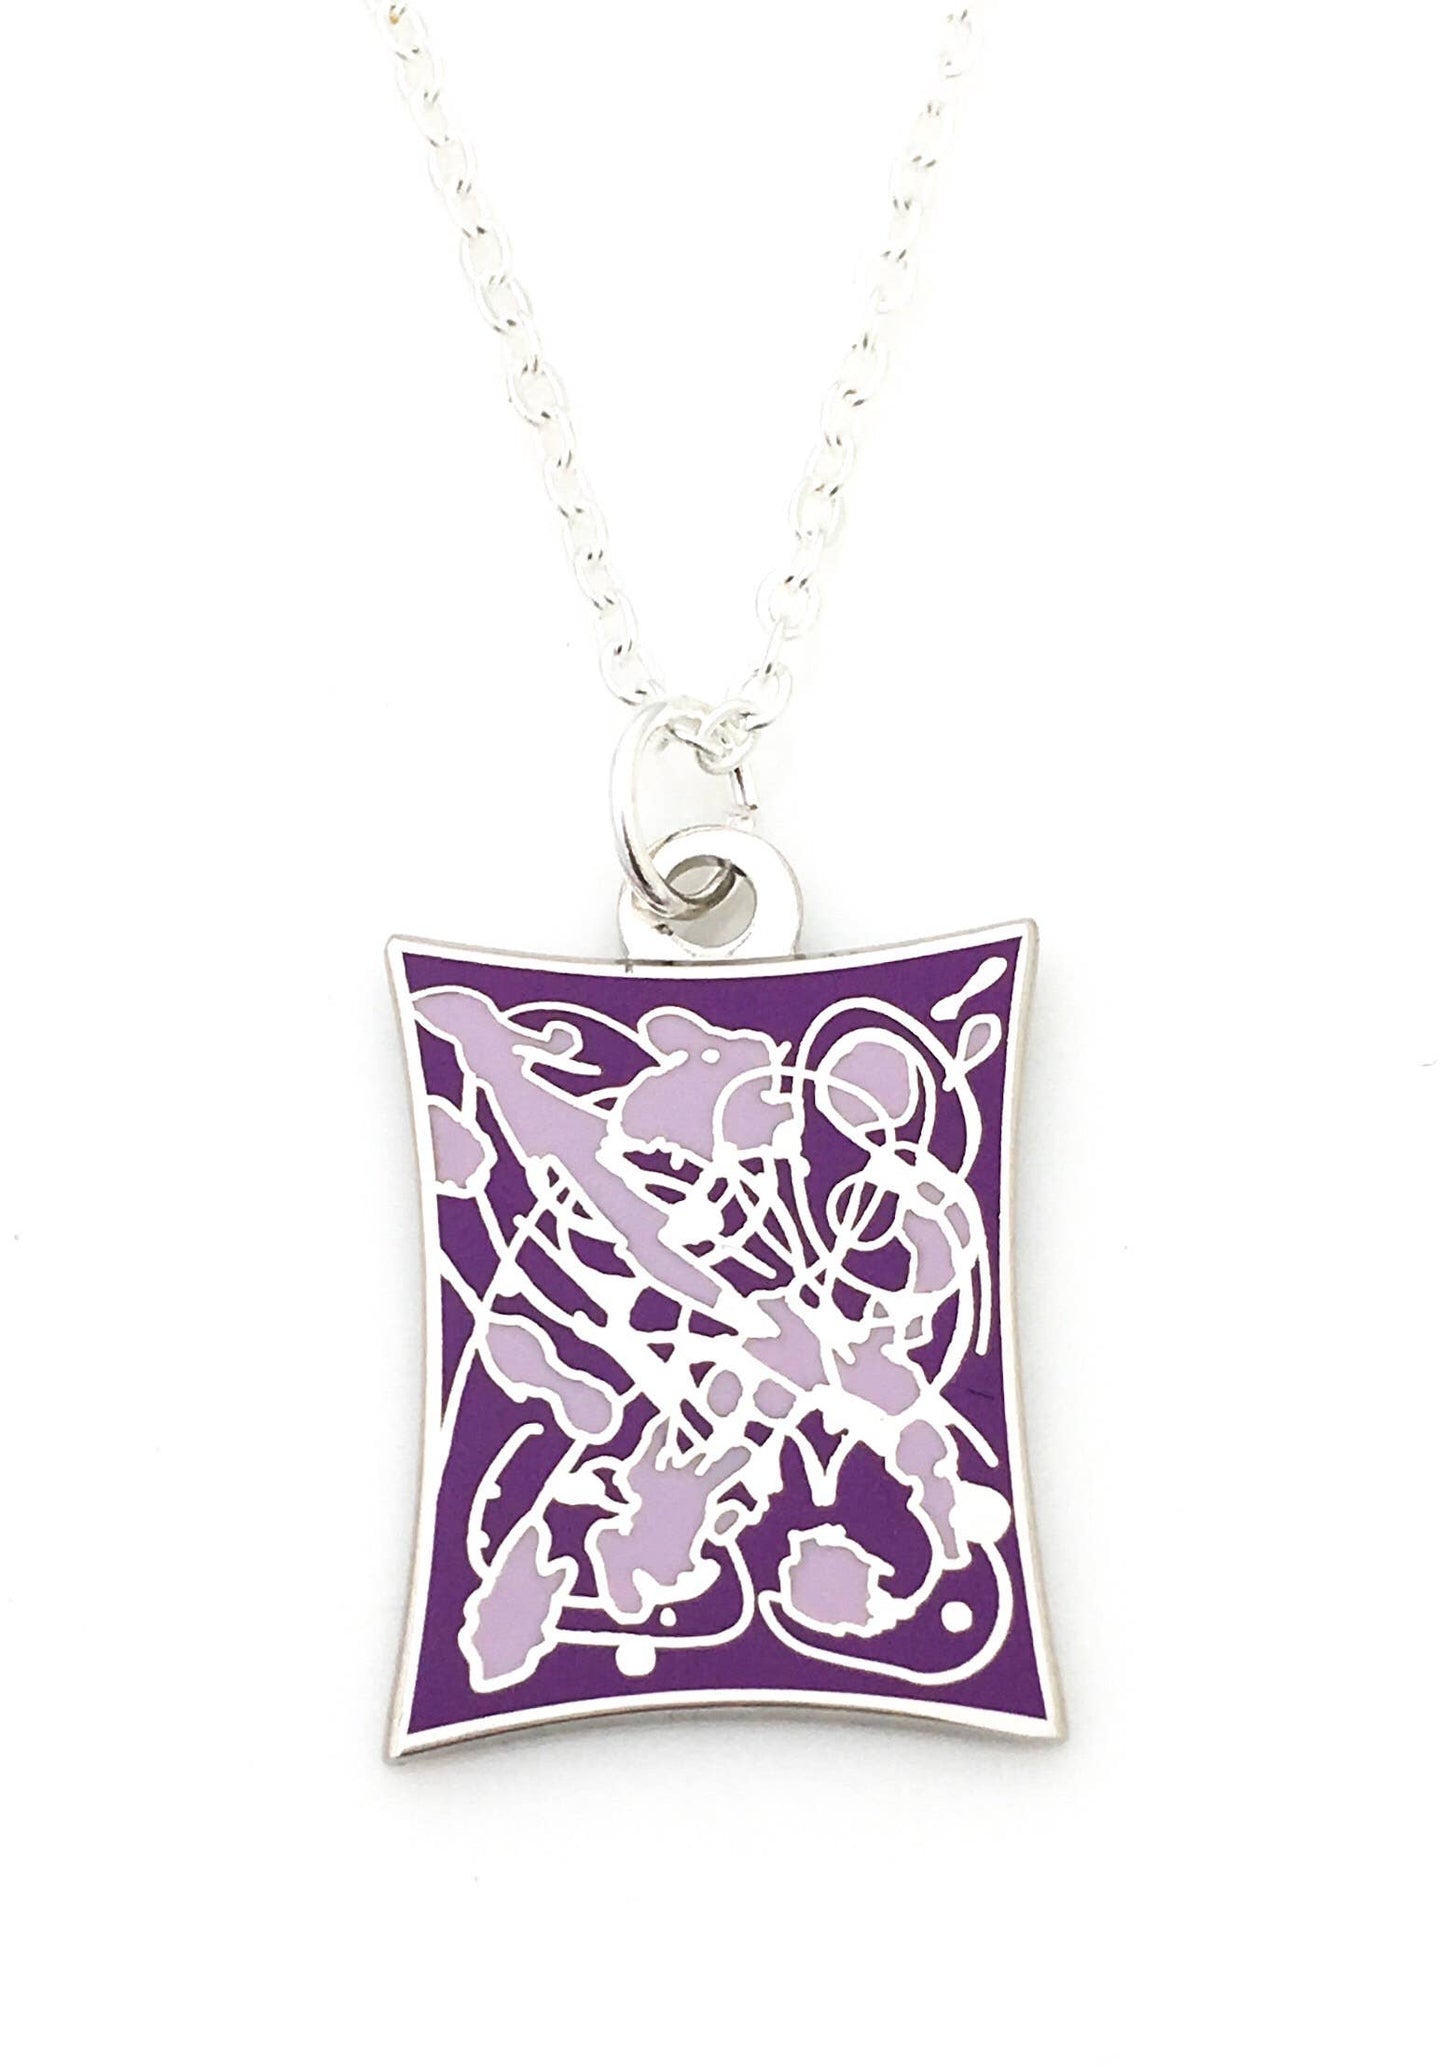 Necklace with a splatter design in purple